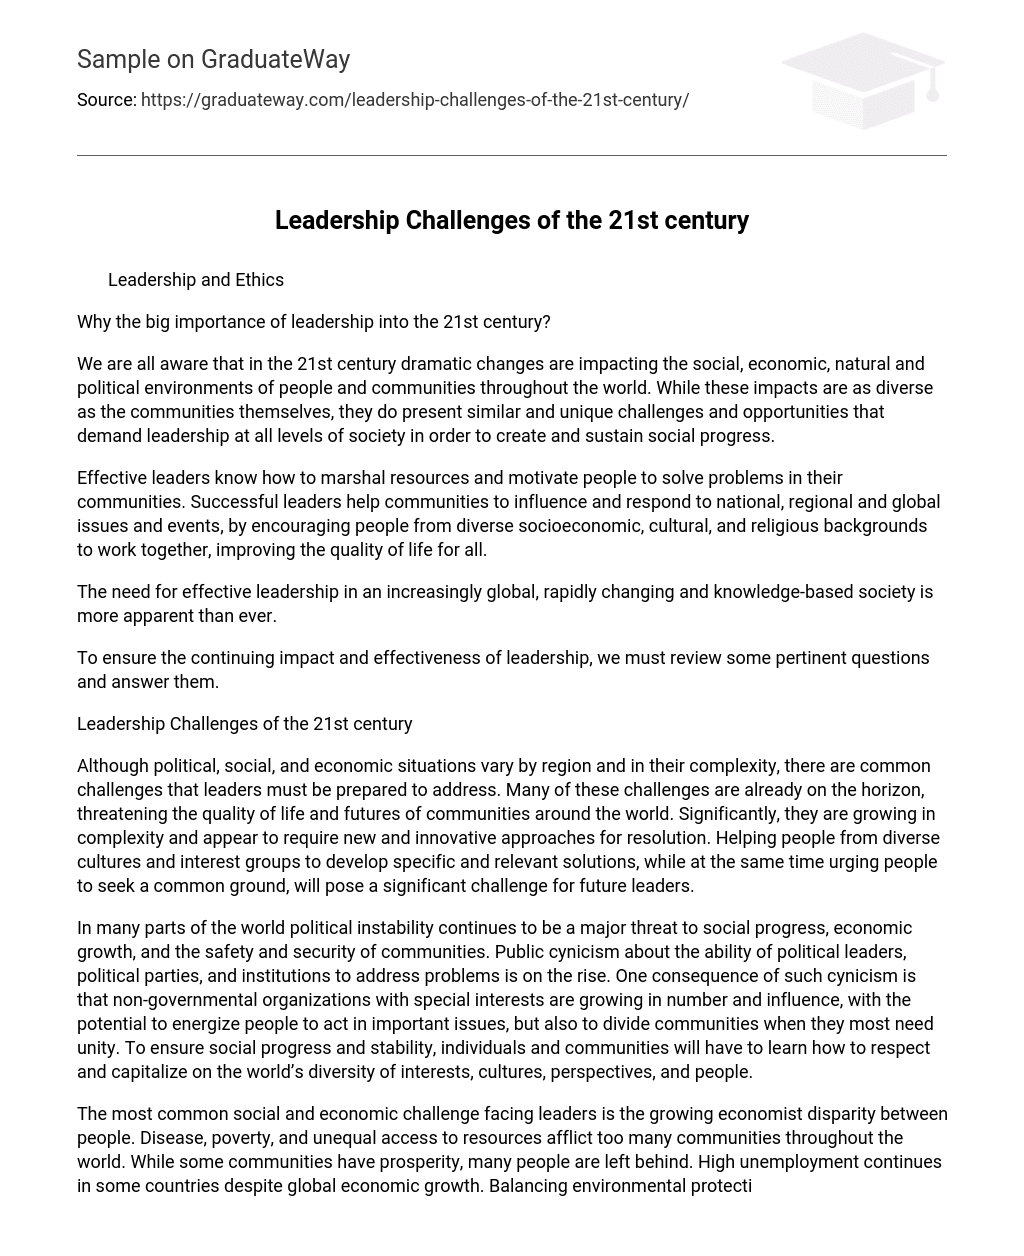 Leadership Challenges of the 21st century